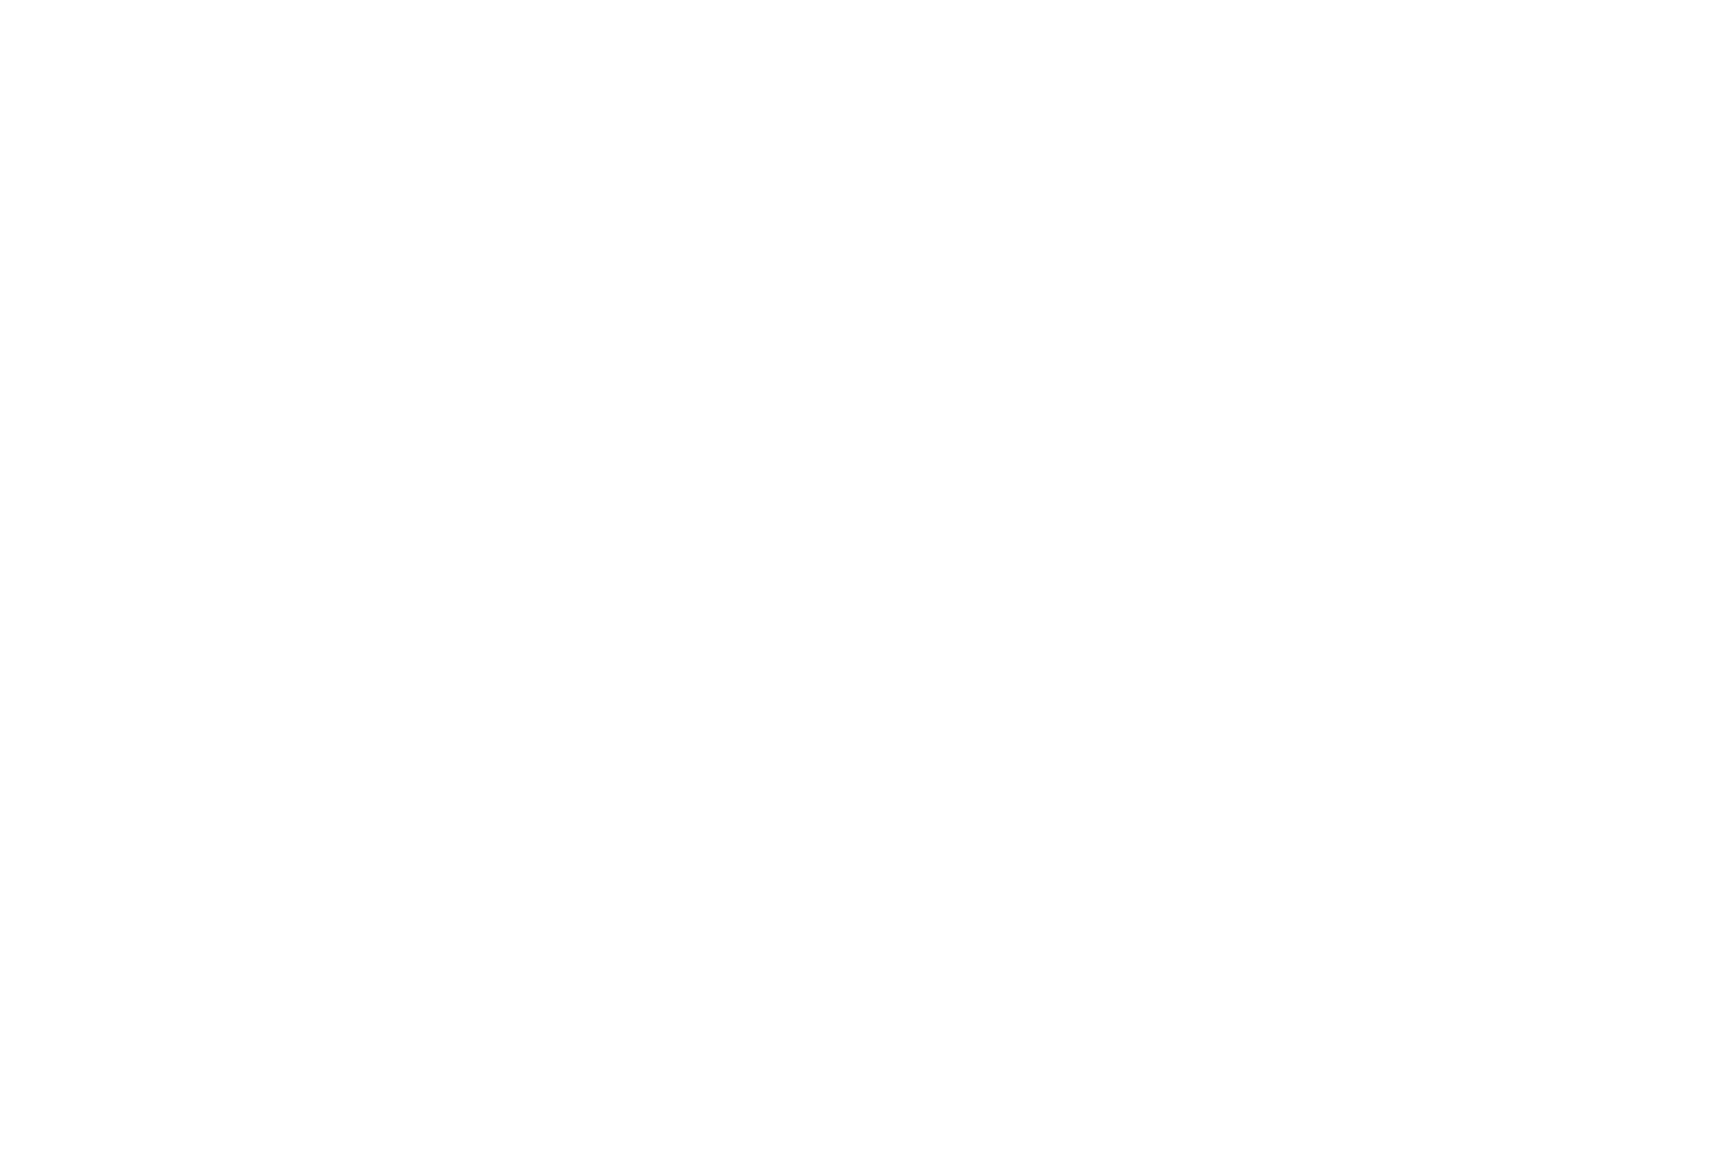 OFFICIAL SELECTION - ENDLESS MOUNTAINS FILM FESTIVAL  - 2017.png